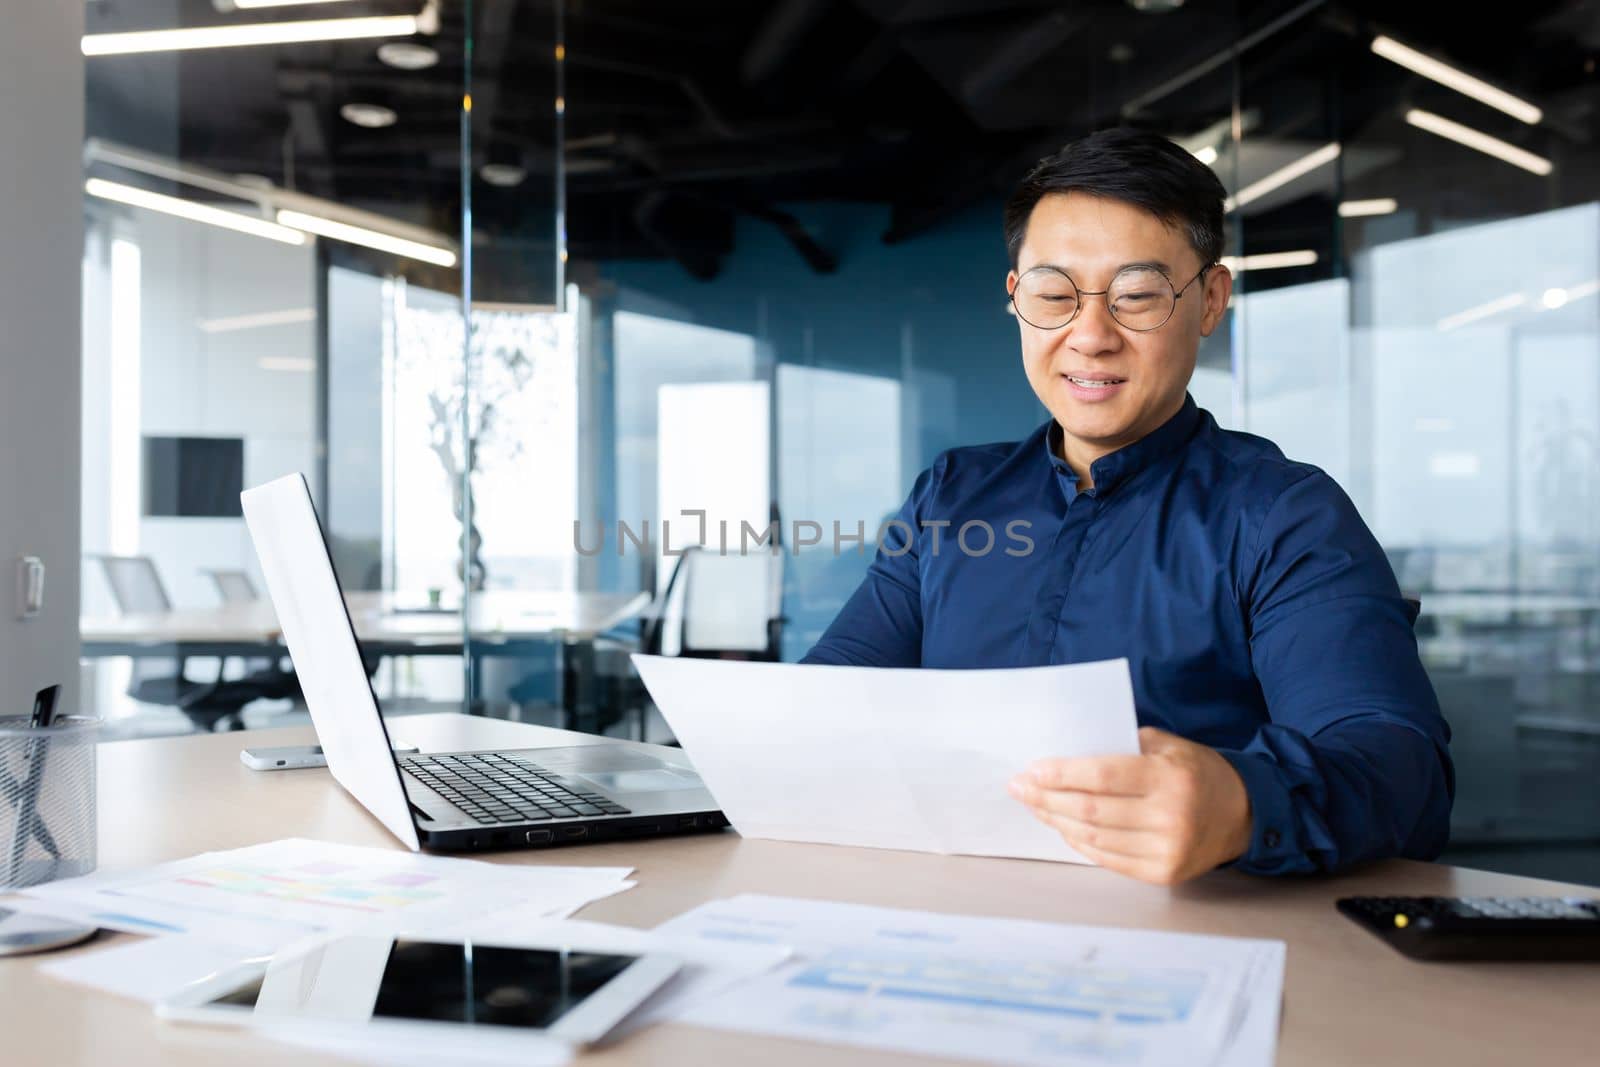 A young man, an Asian architect, designer, engineer, freelancer works in the office at a desk using a laptop. Holds documents, plans, drawings in his hands.